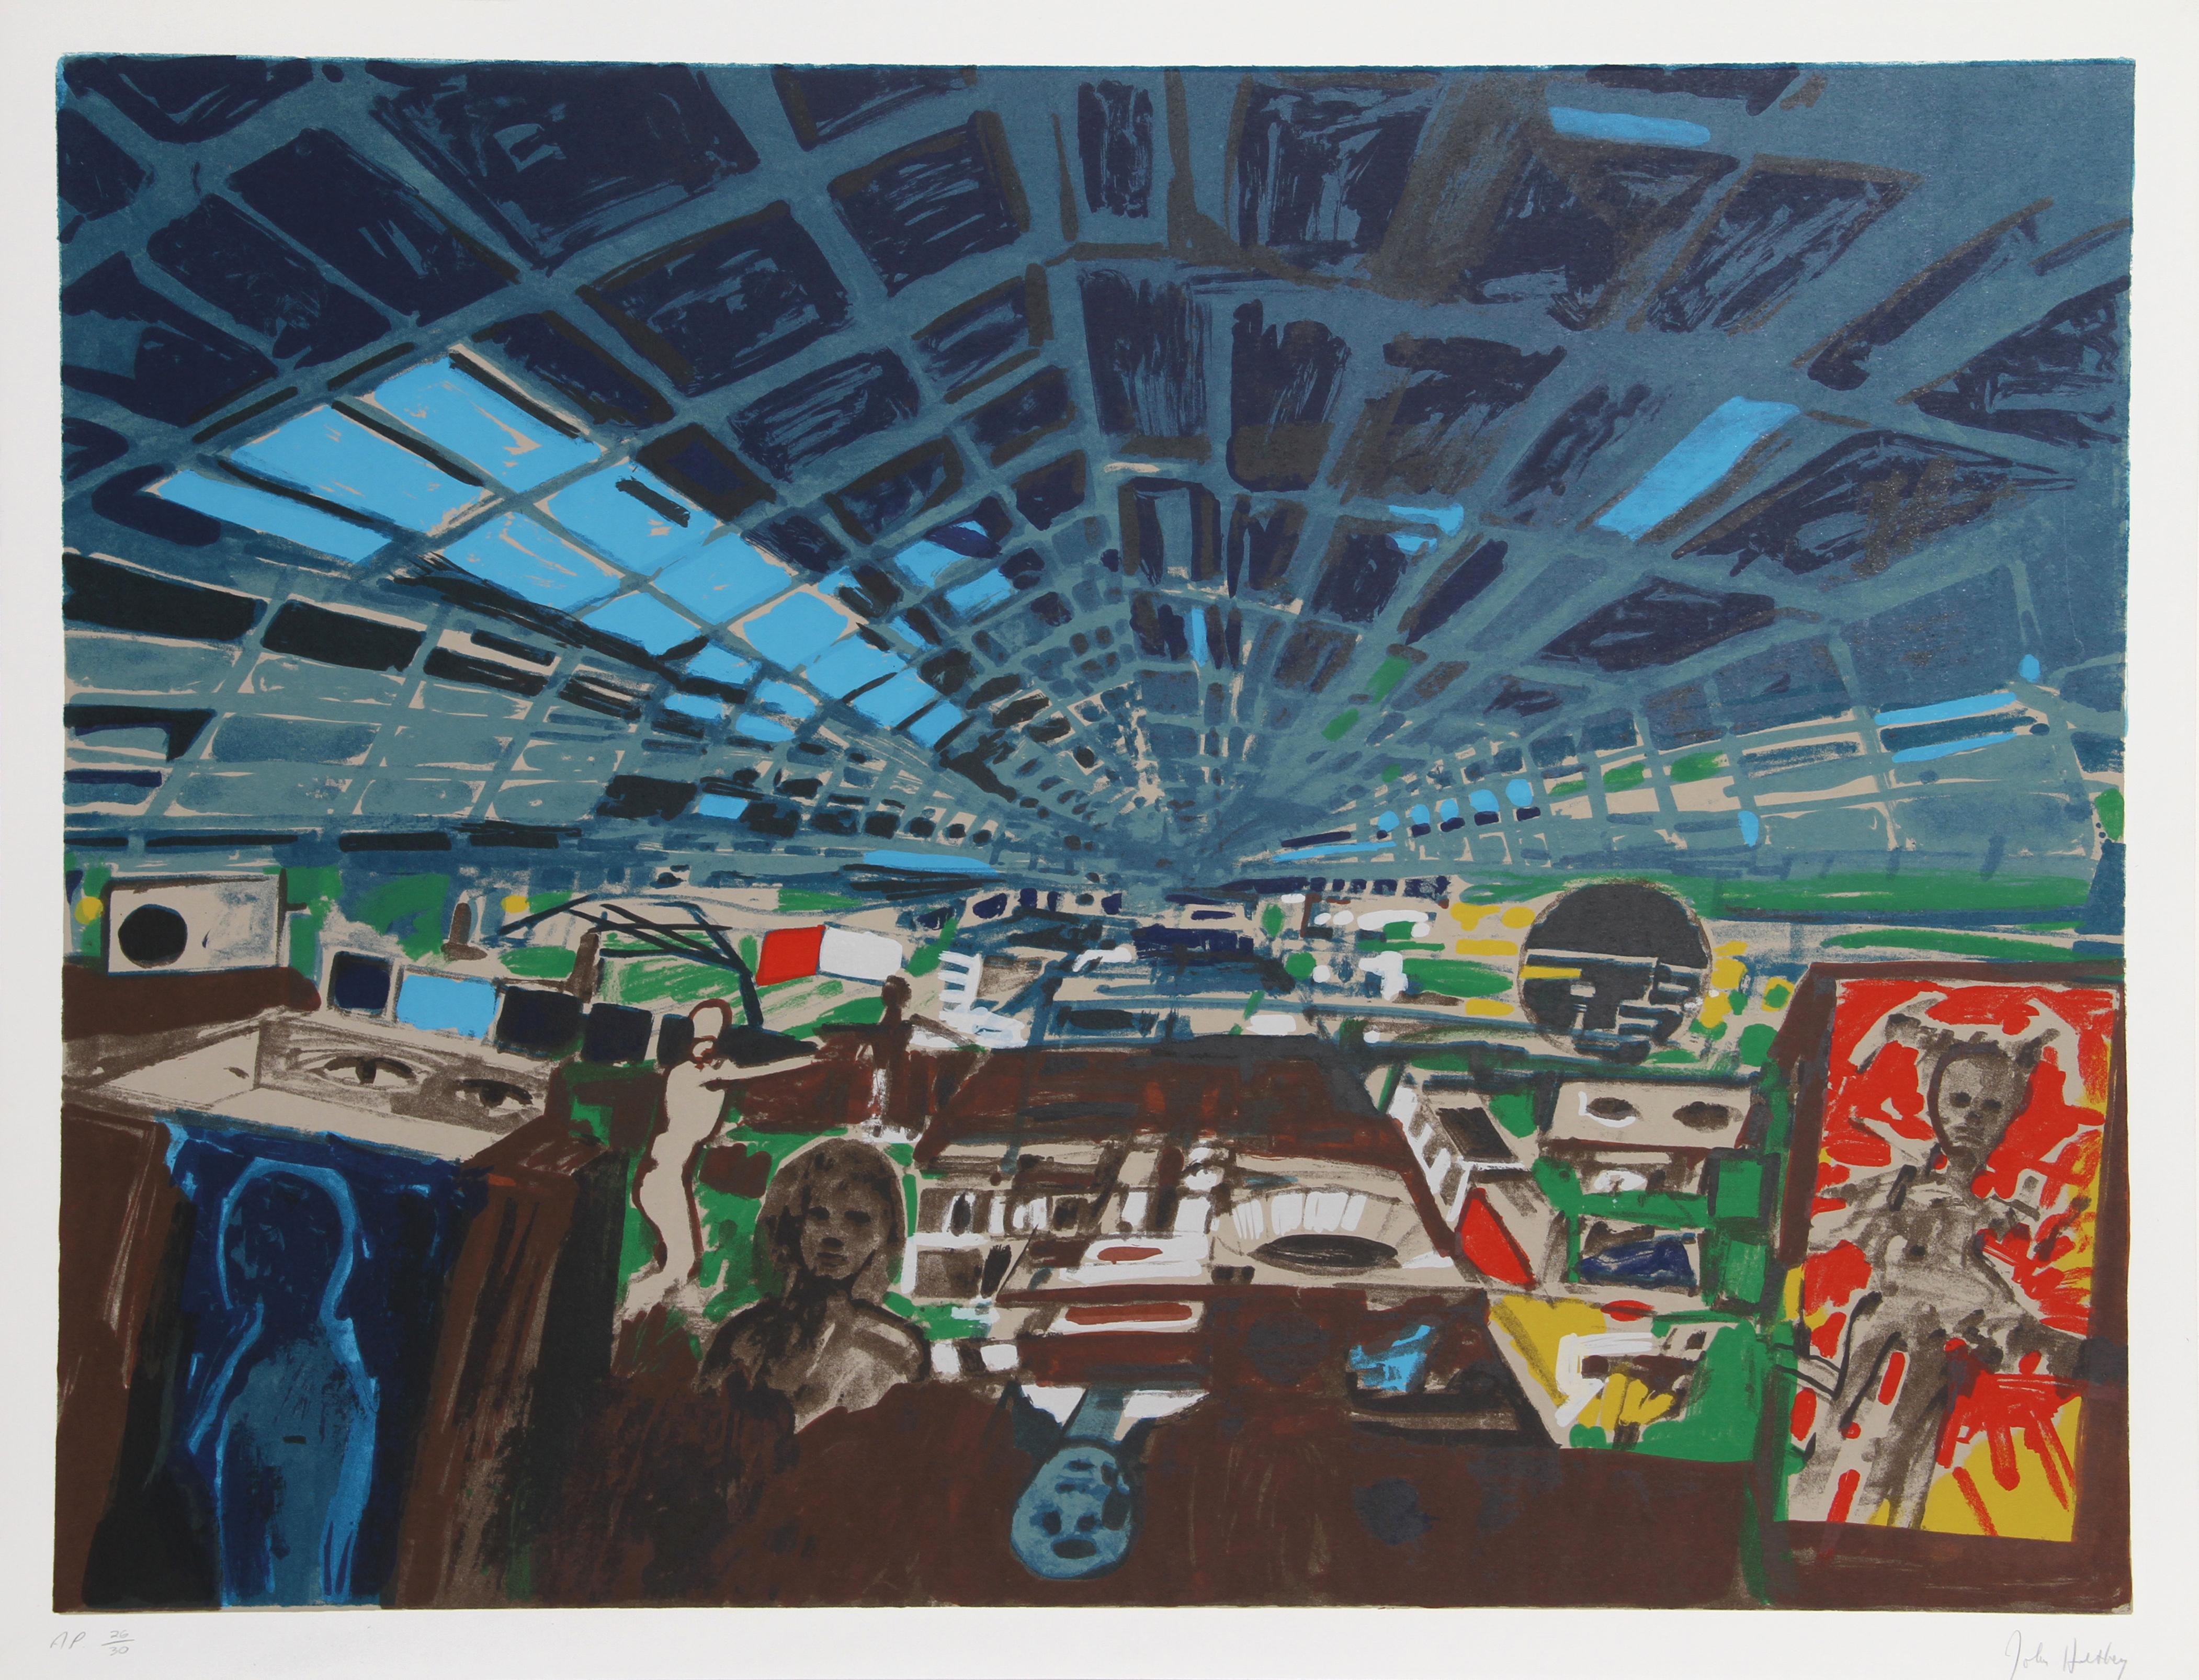 Artist: John Hultberg
Title: Greenhouse
Year: 1978
Medium: Lithograph, signed and numbered in pencil
Edition: 200, AP 30
Image Size: 24 x 32 inches 
Paper Size: 26 in. x 34 in. (66.04 cm x 86.36 cm)